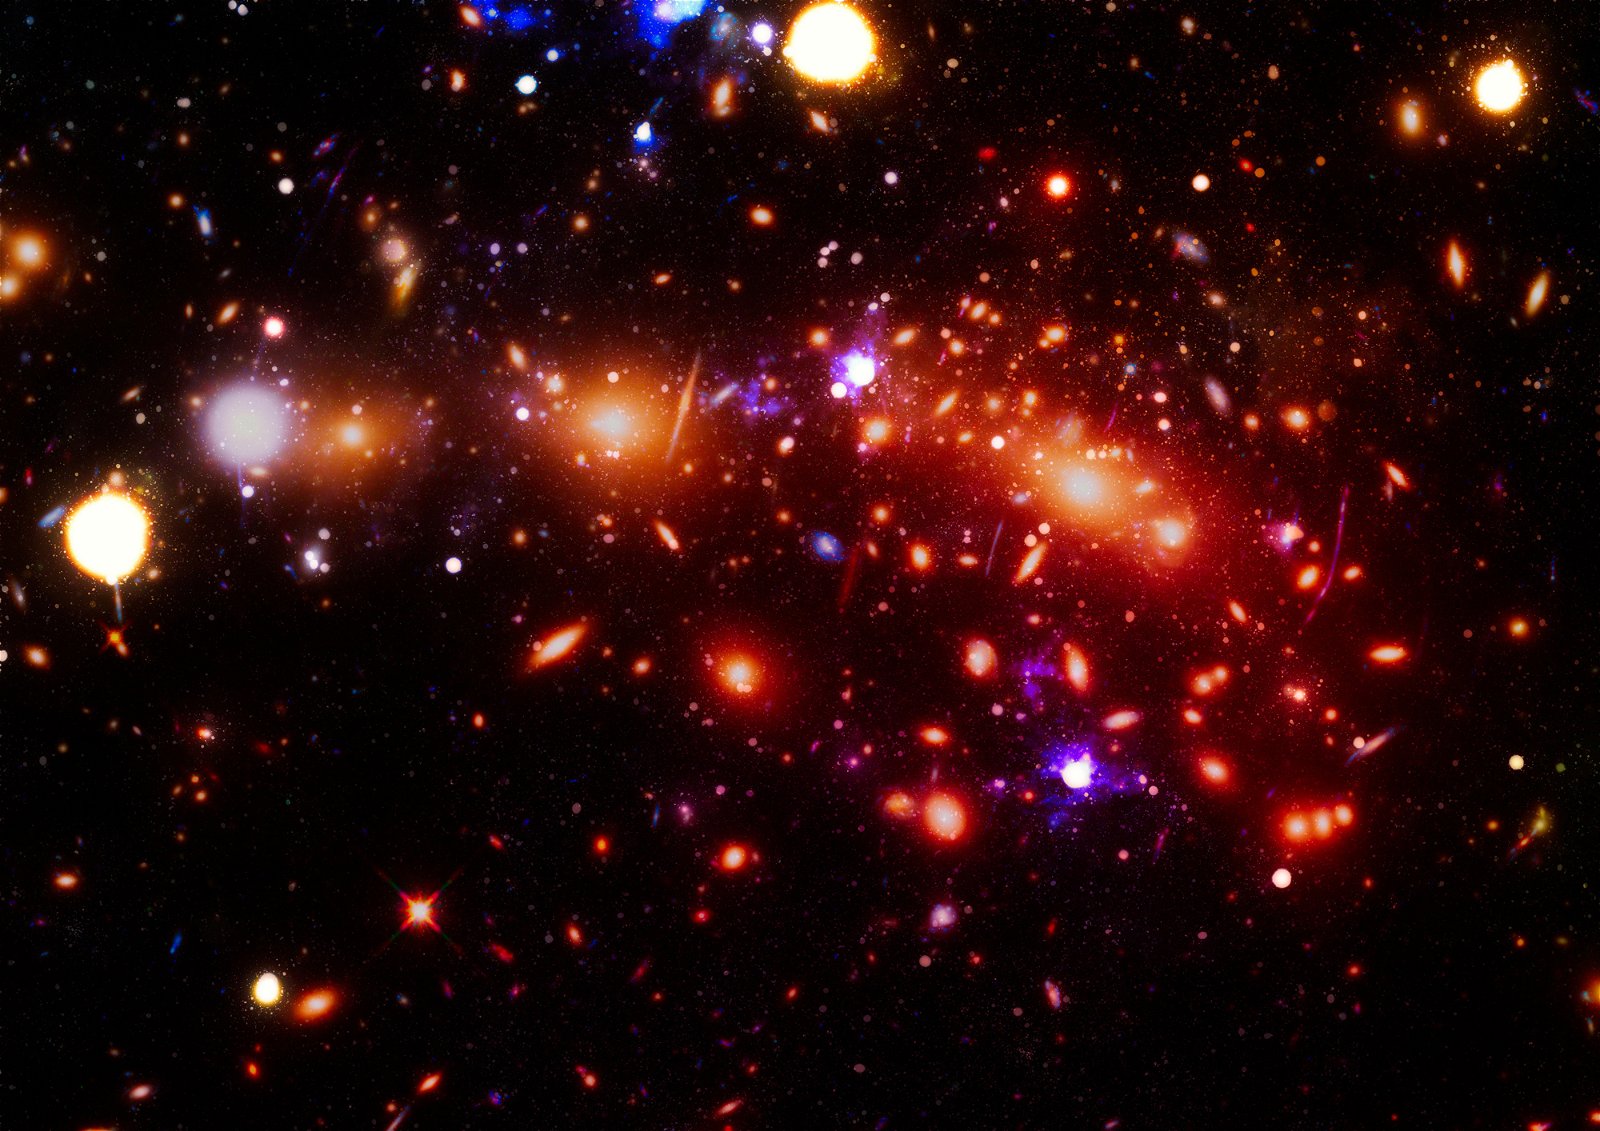 red shift galaxies images